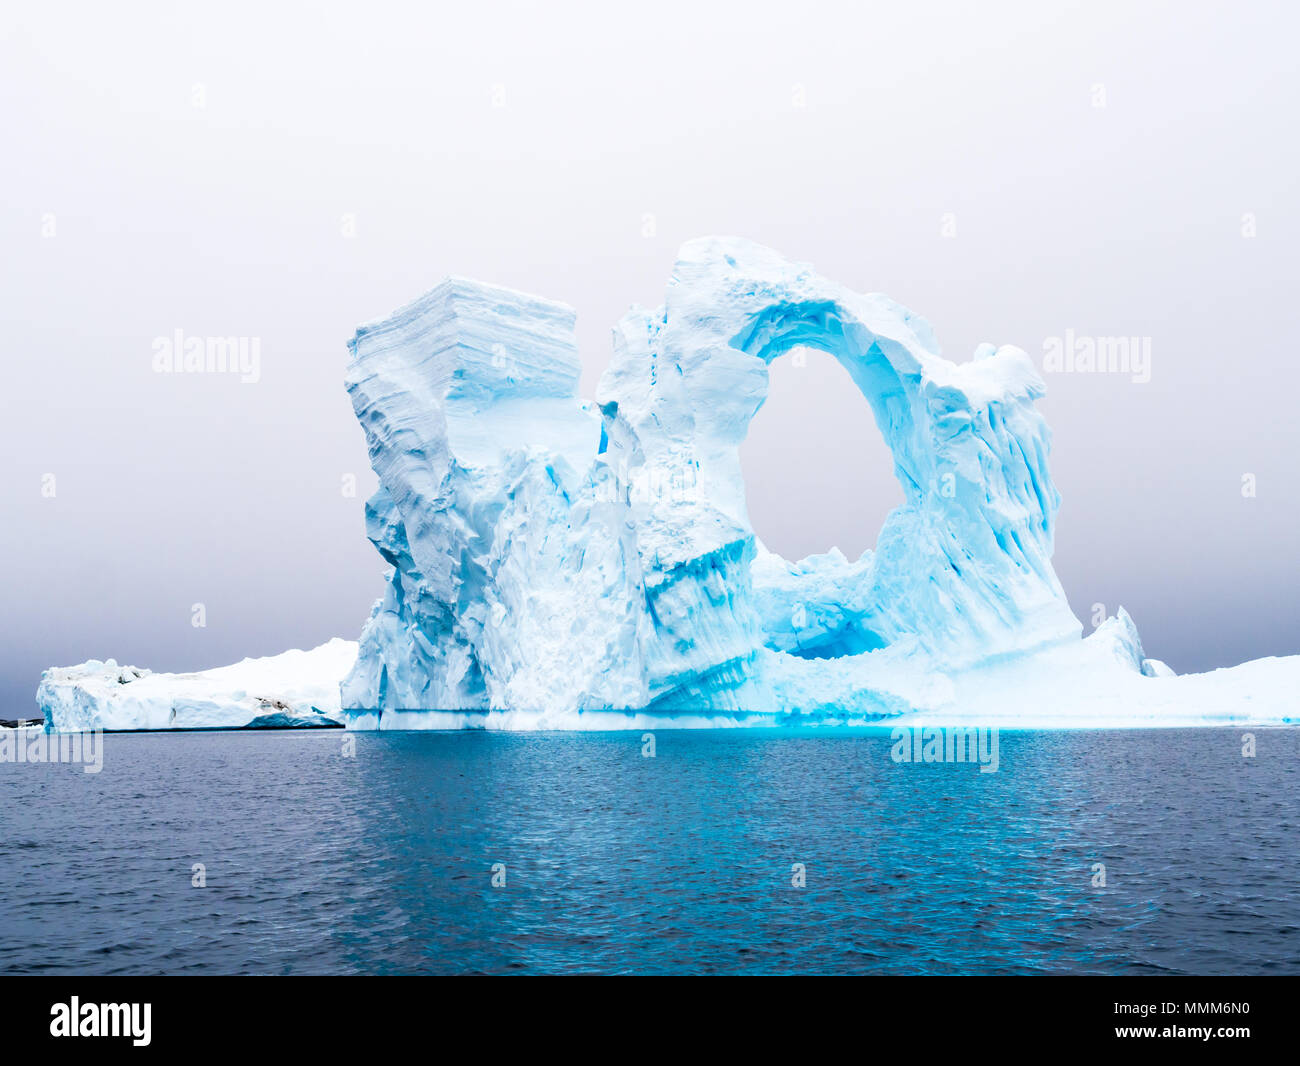 Arch shaped iceberg aground in Pleneau Bay as part of iceberg graveyard, south of Lemaire Channel west of Antarctic Peninsula, Antarctica Stock Photo